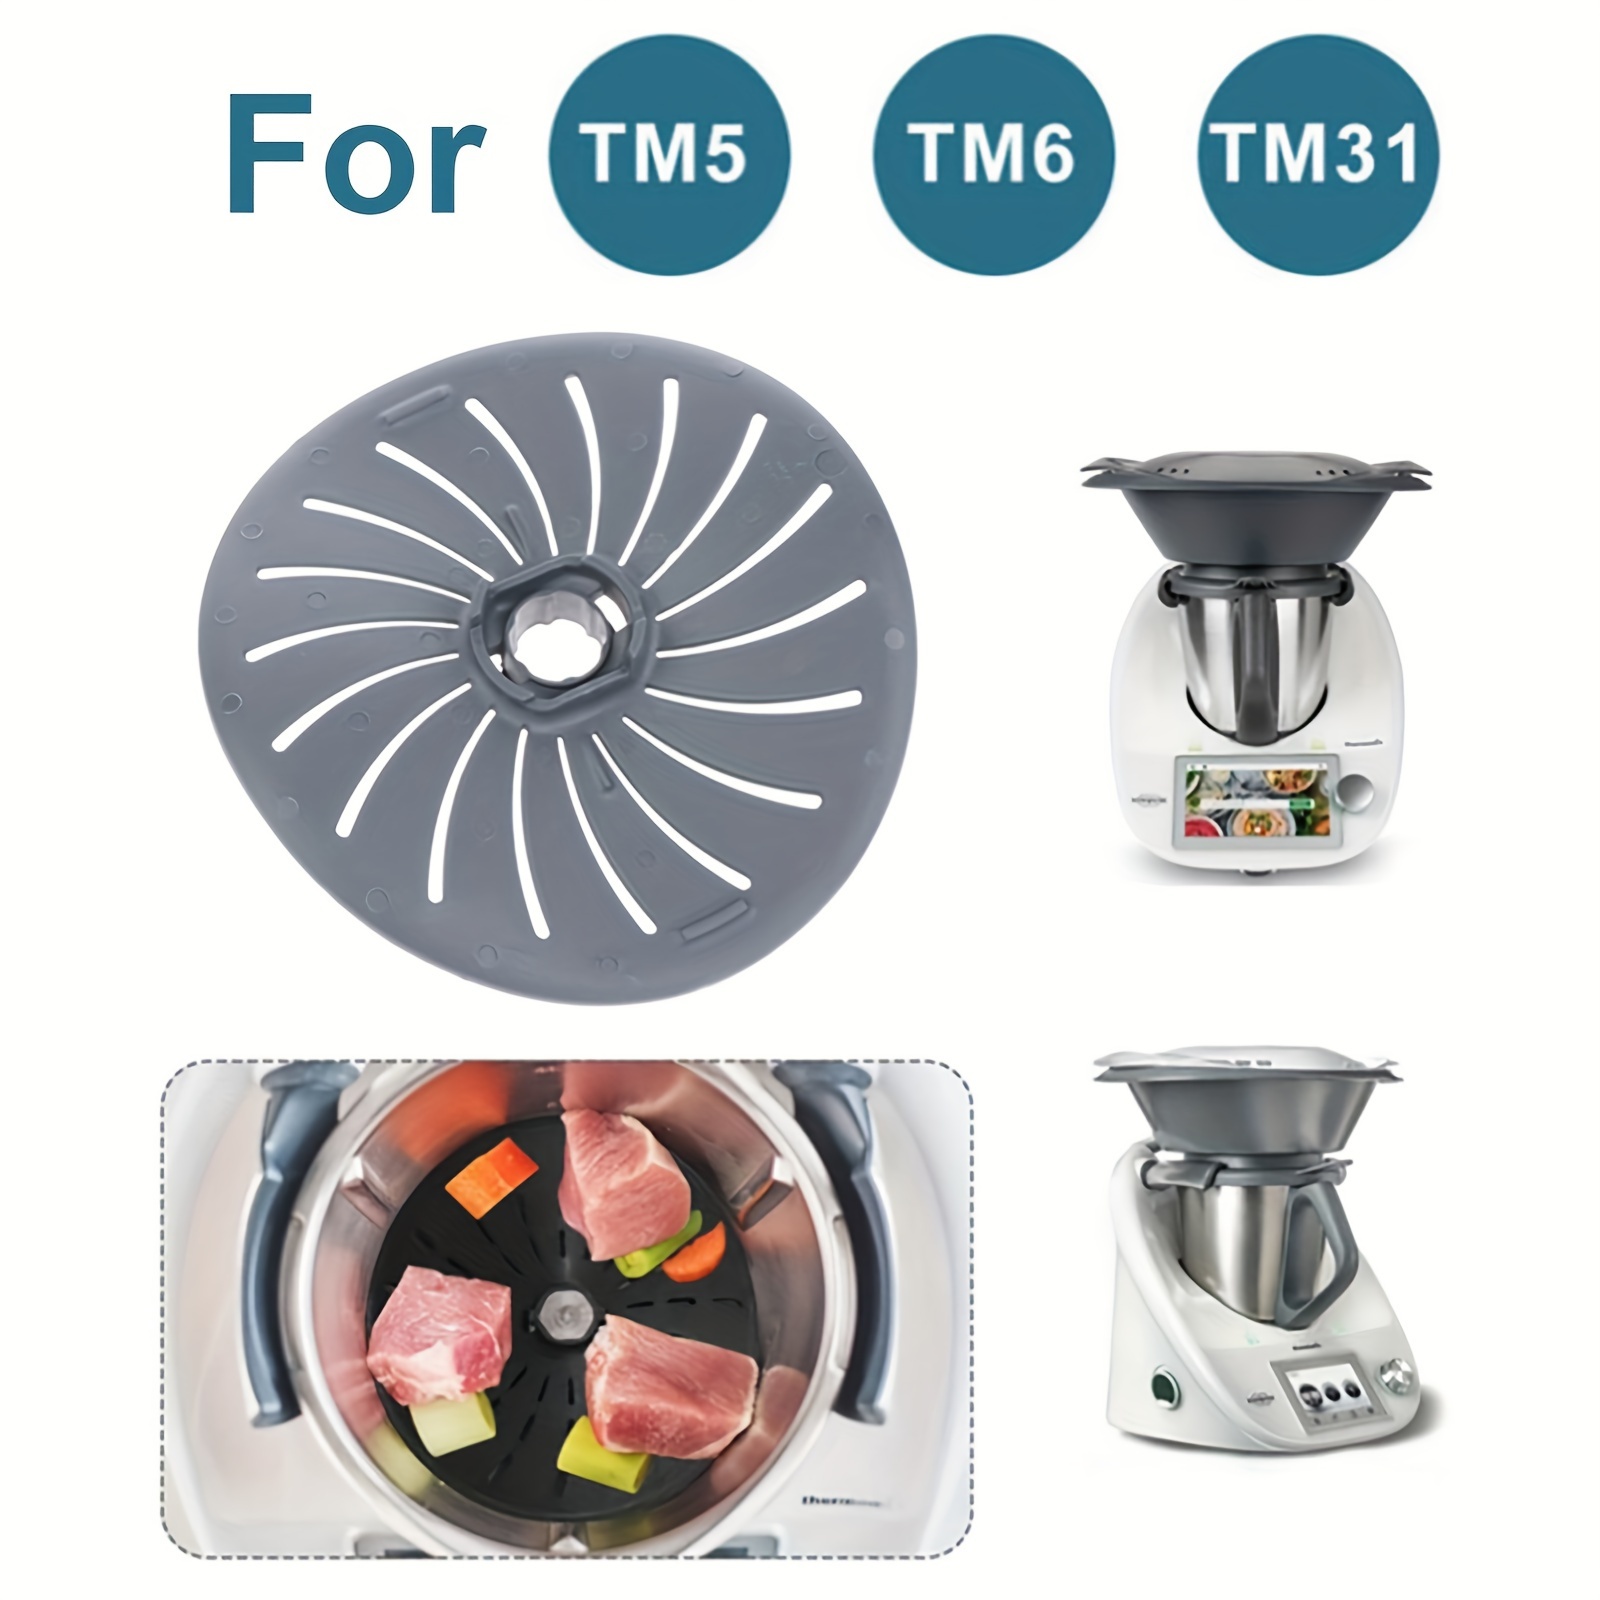 How to get a Thermomix in the Netherlands - Thermomix TM6, Thermomix TM5,  Thermomix Nederland, Thermomix recepten